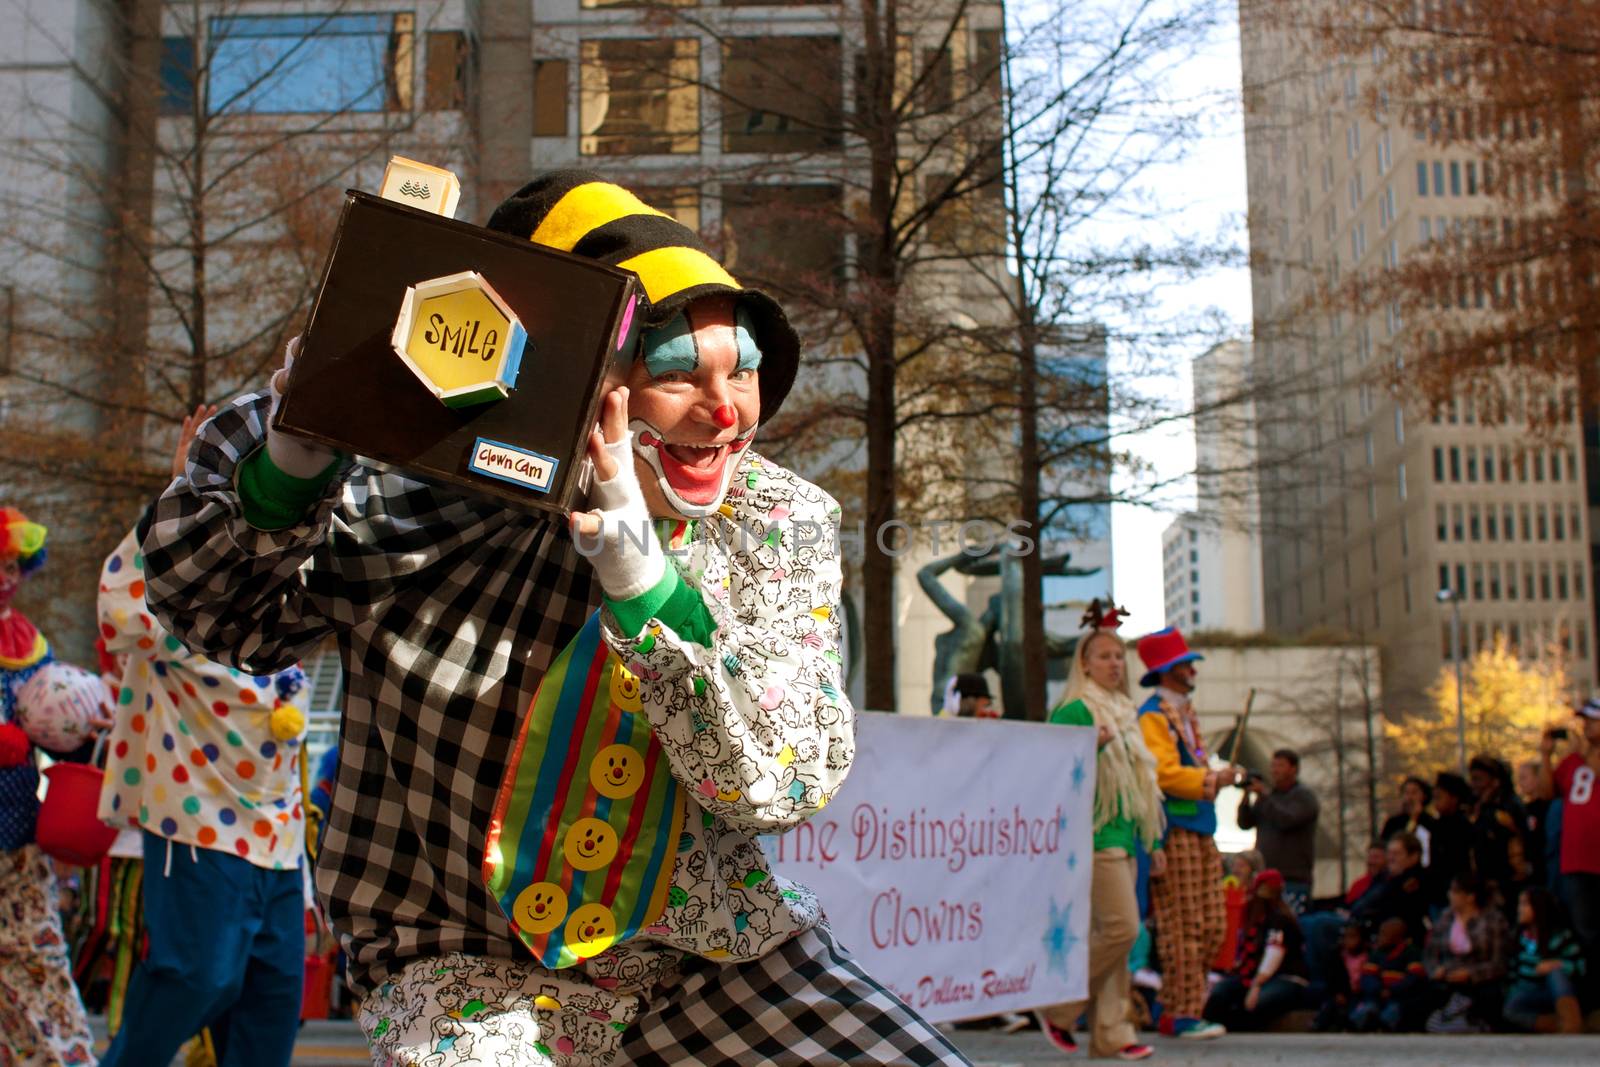 Atlanta, GA, USA - December 1, 2012:  A clown poses with his "smile cam," as he performs for thousands of spectators attending the annual Atlanta Christmas parade in downtown Atlanta.